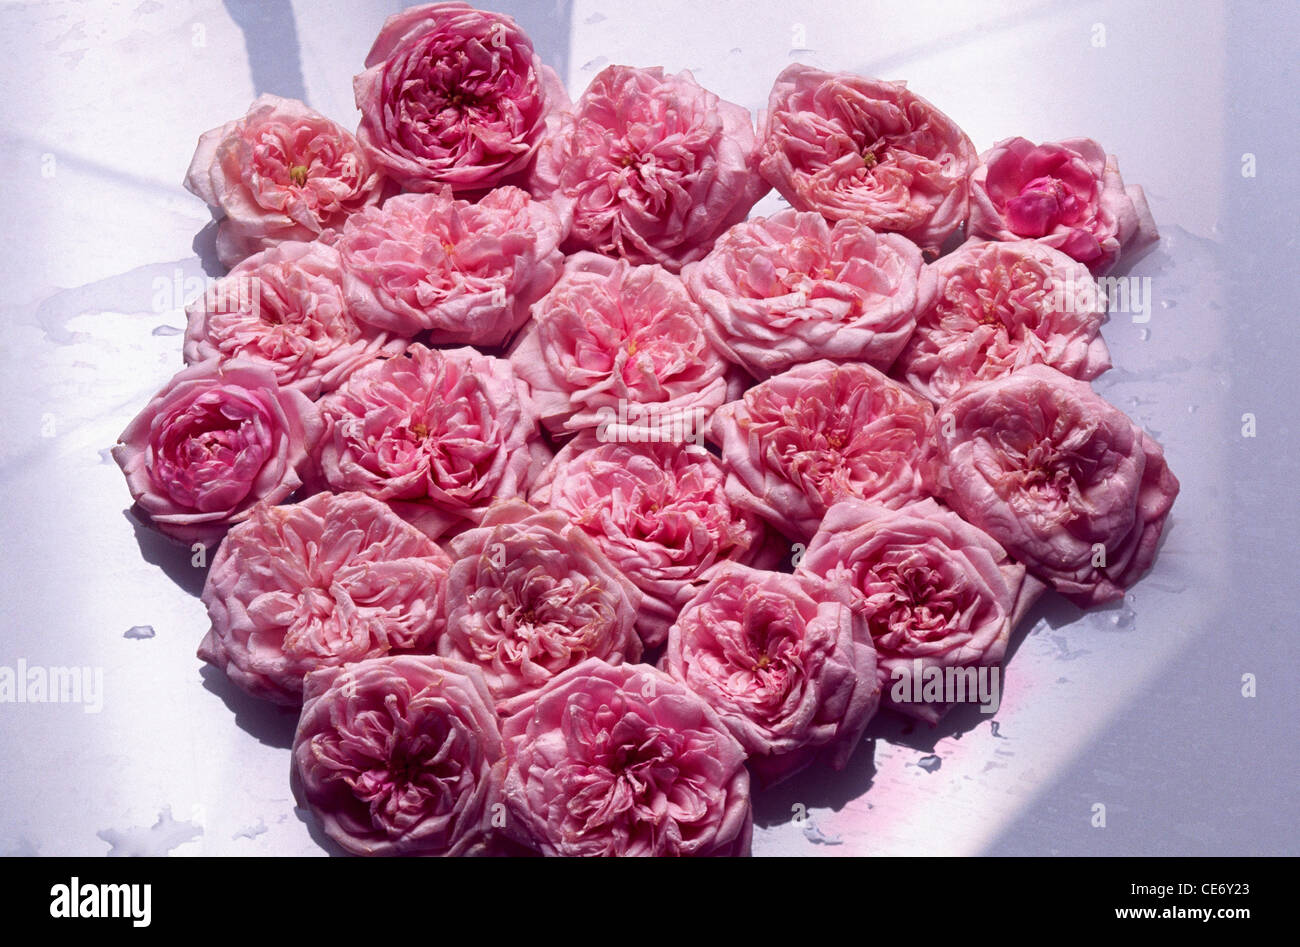 Pink rose flowers arrangement on white background Stock Photo